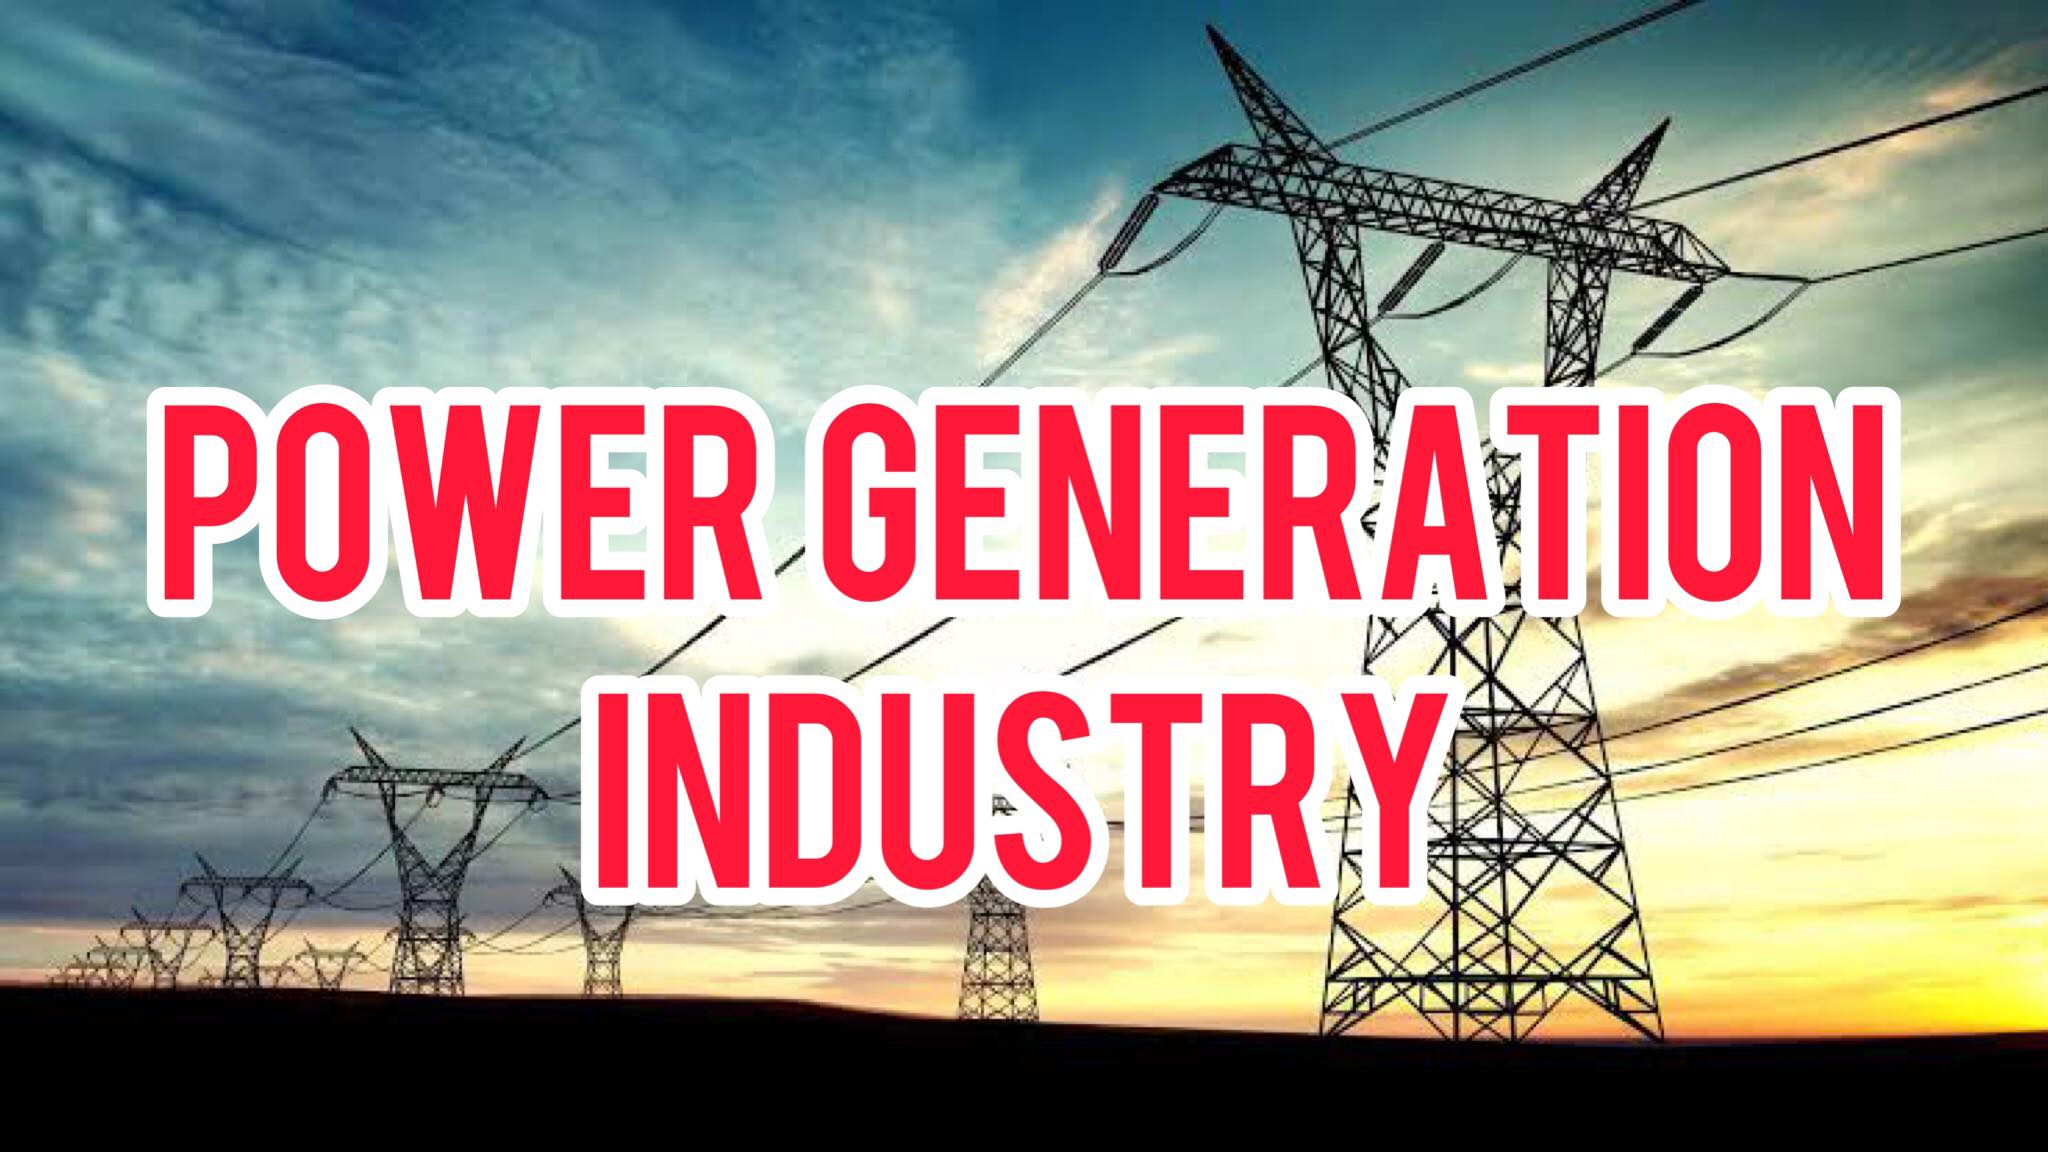 How Many Jobs Are Available In Power Generation